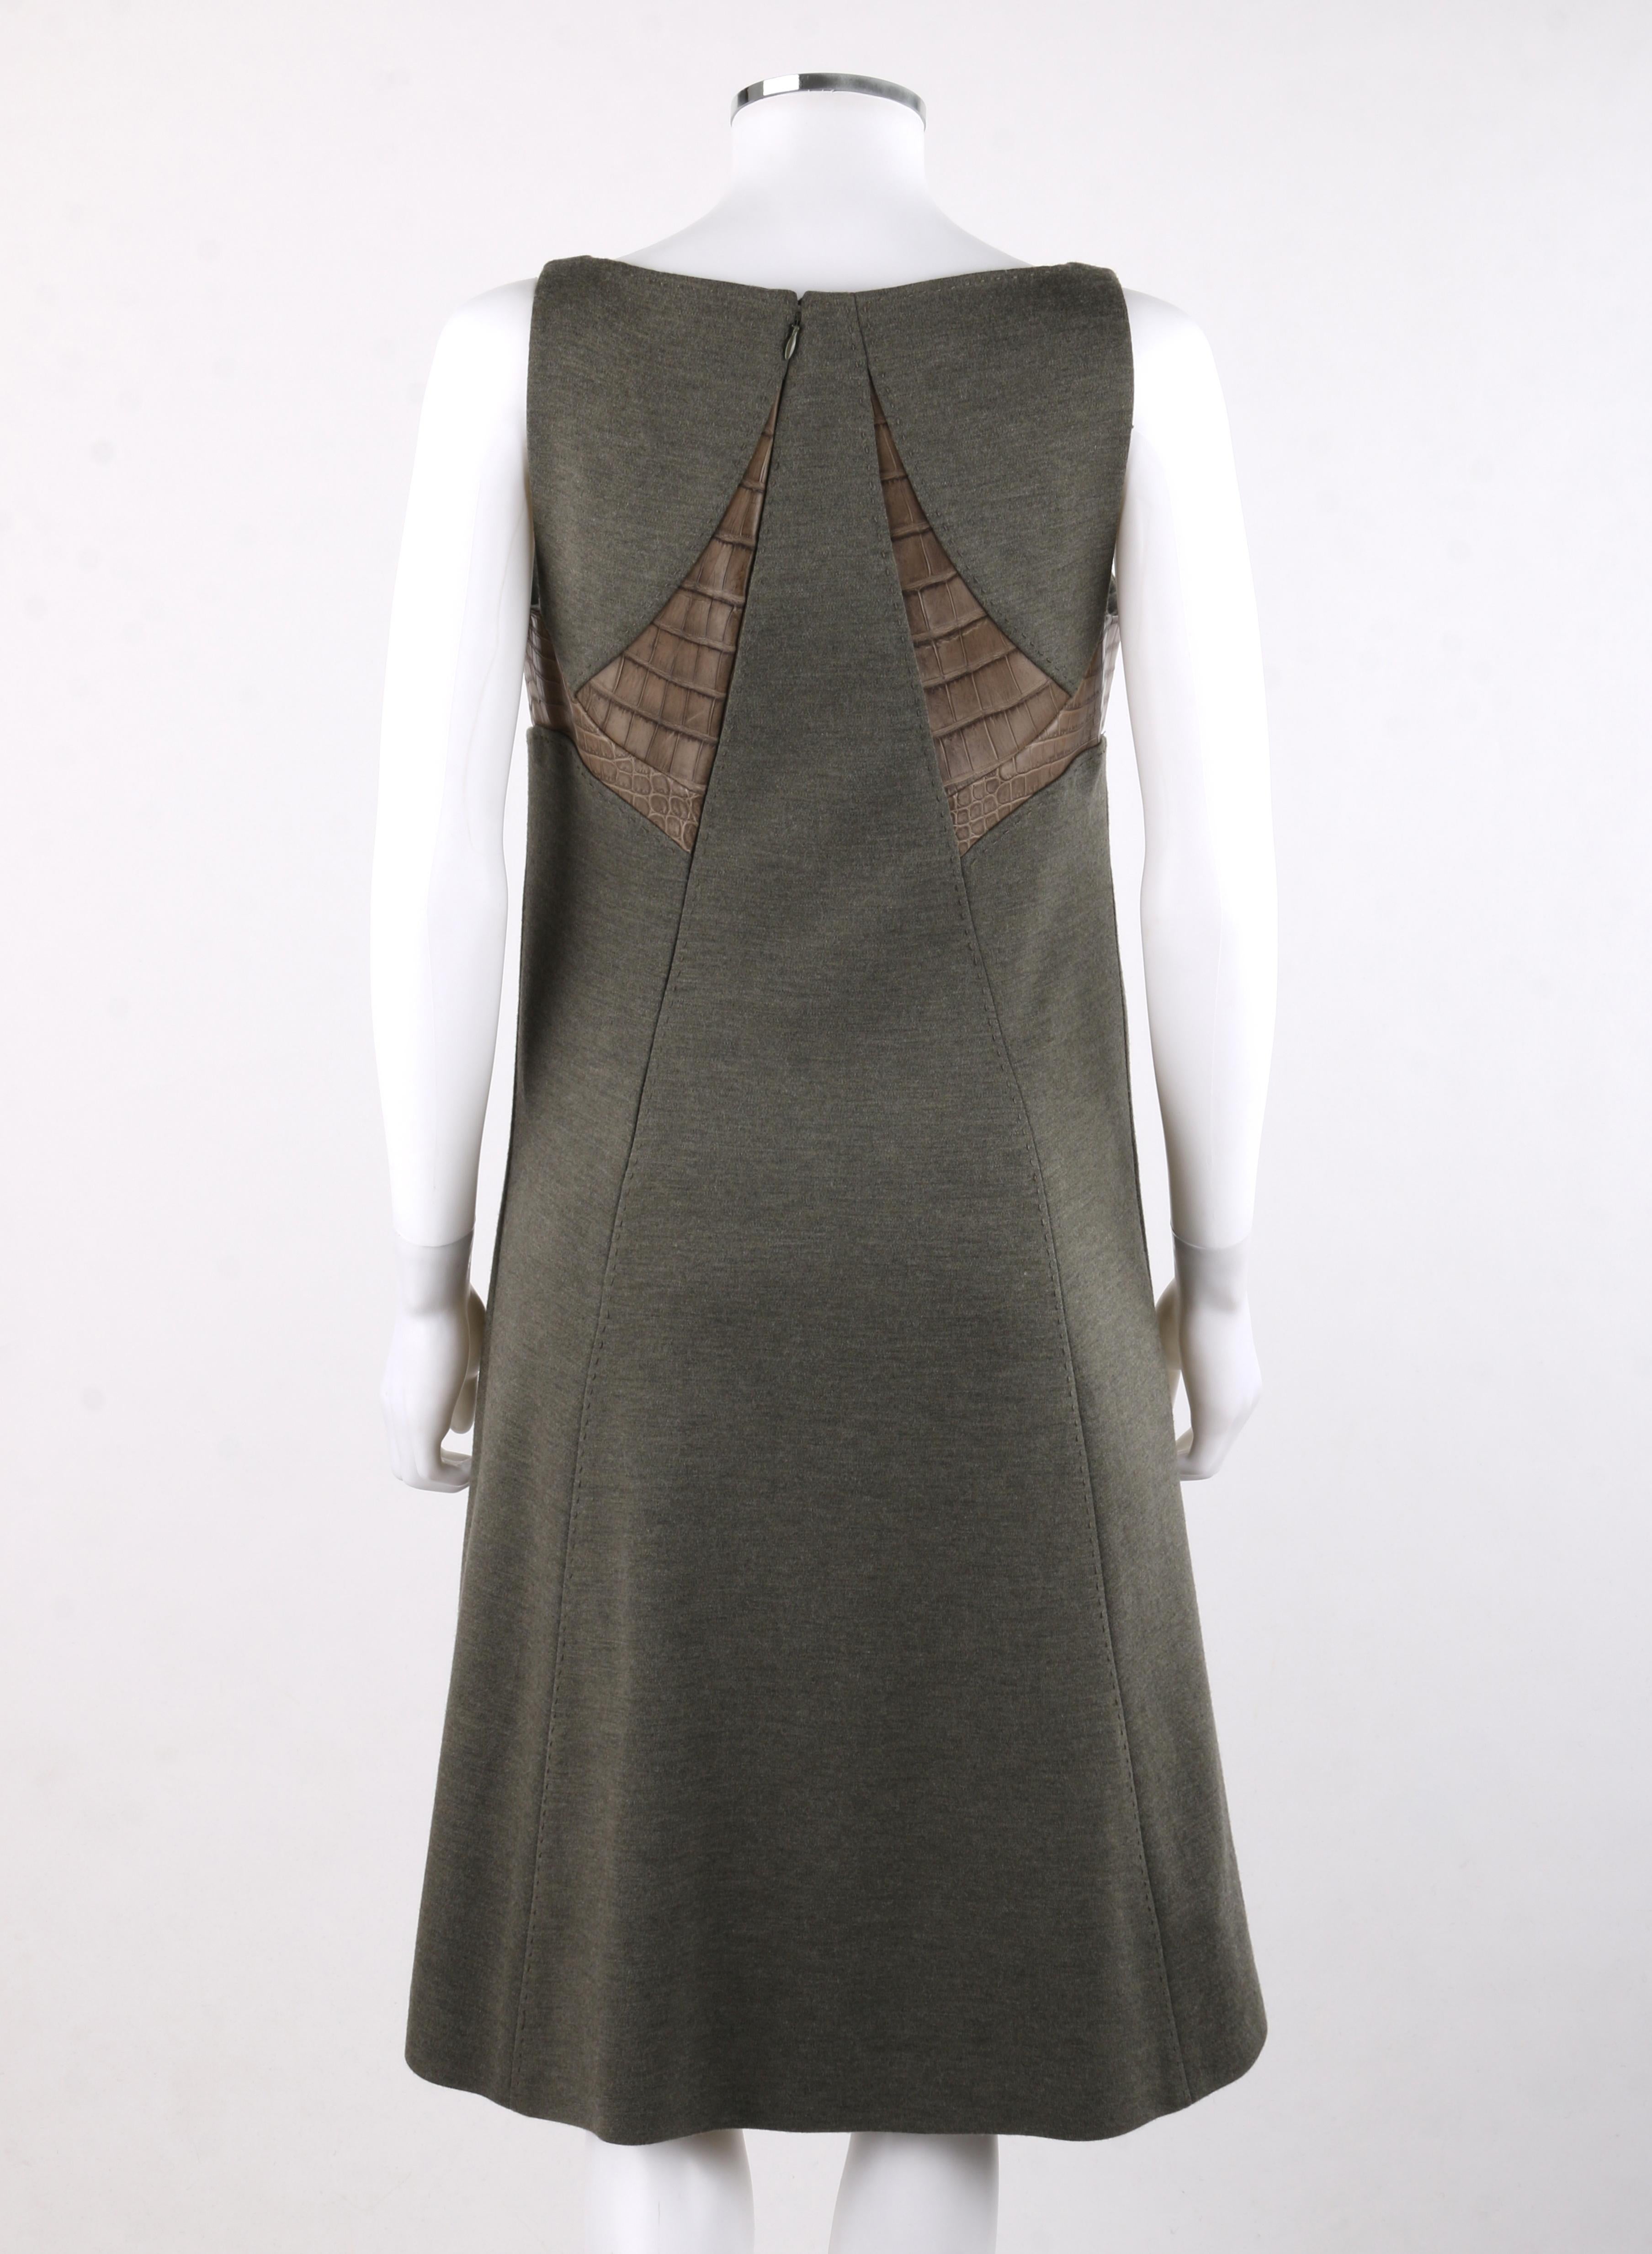 Women's RALPH RUCCI A/W 2006 Olive Alligator Leather Cutout Shift A-Line Cocktail Dress